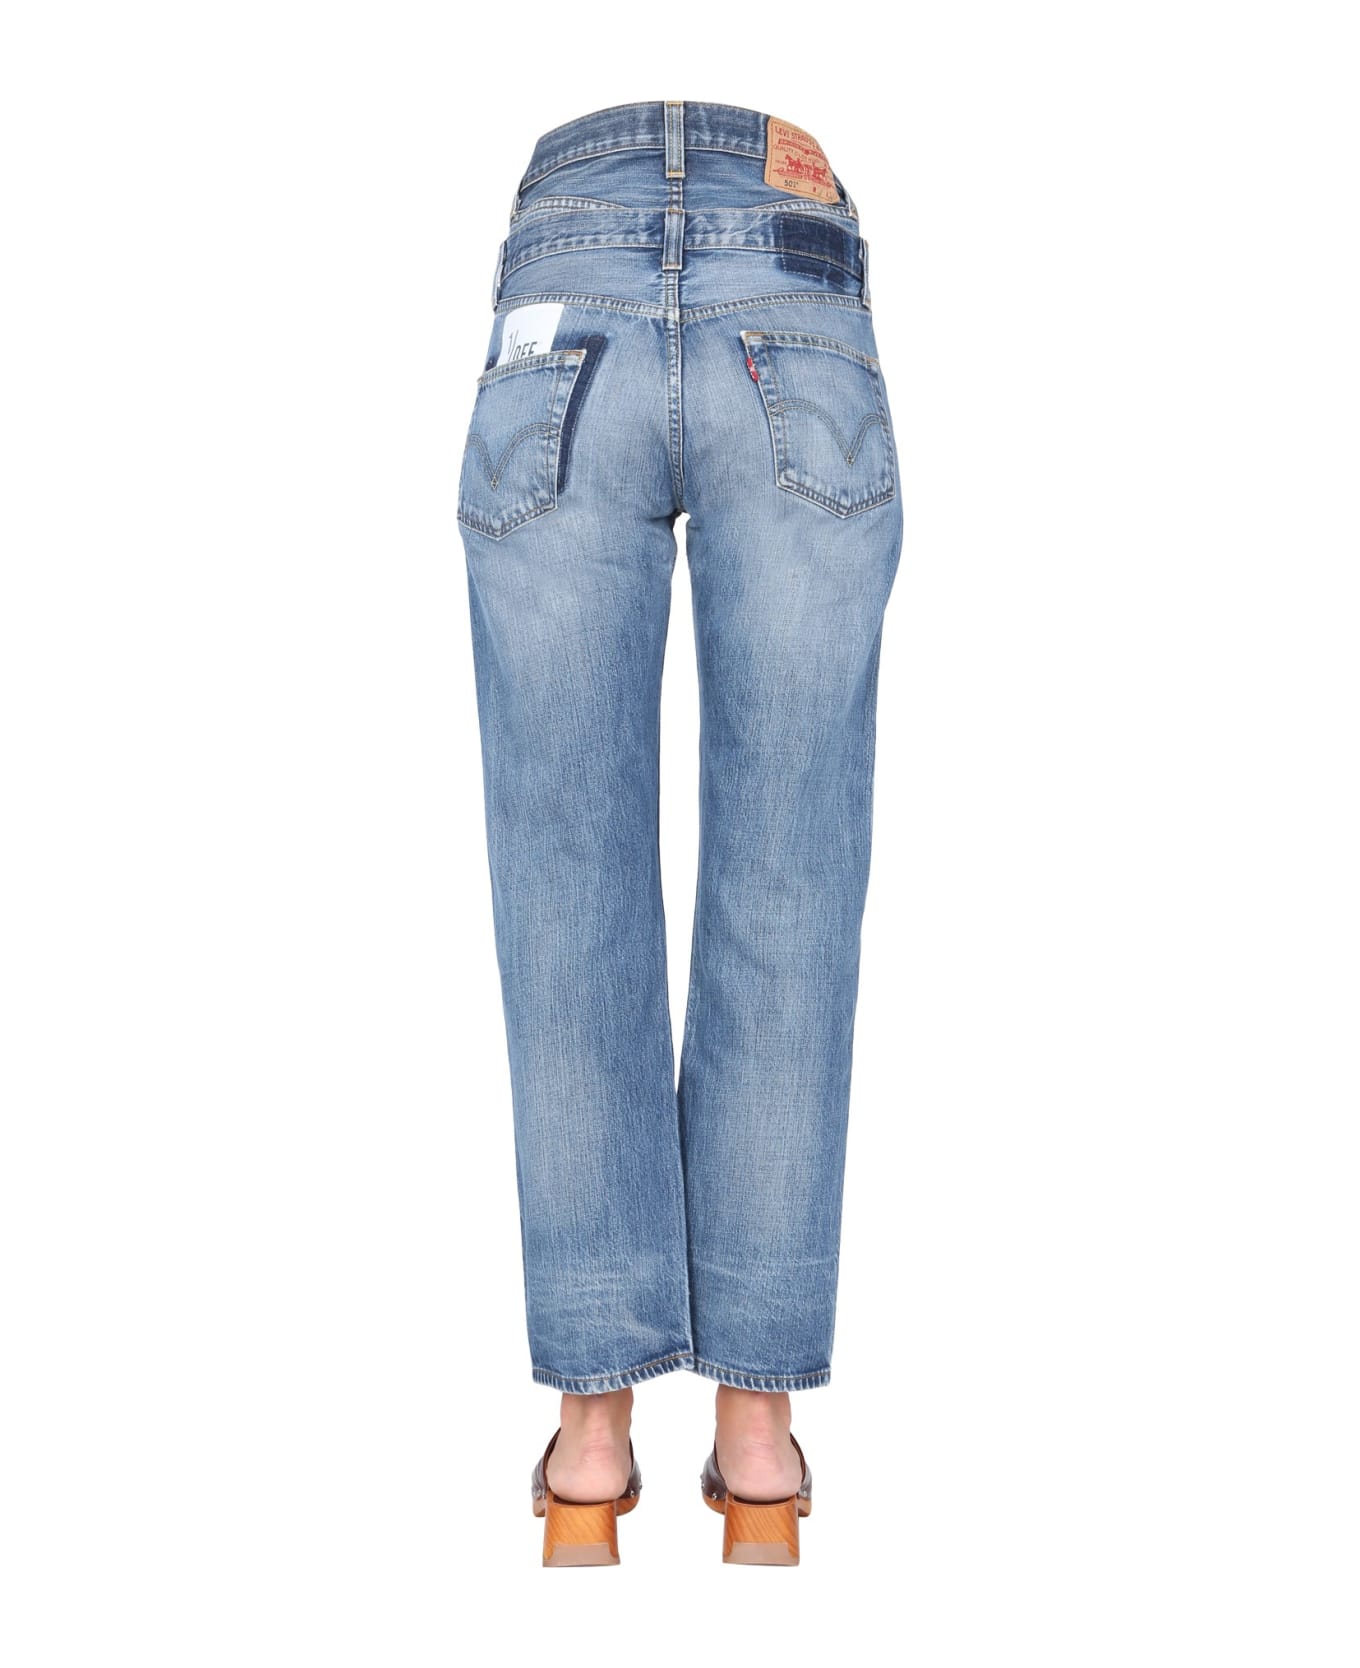 1/OFF Double Waisted Jeans - DENIM